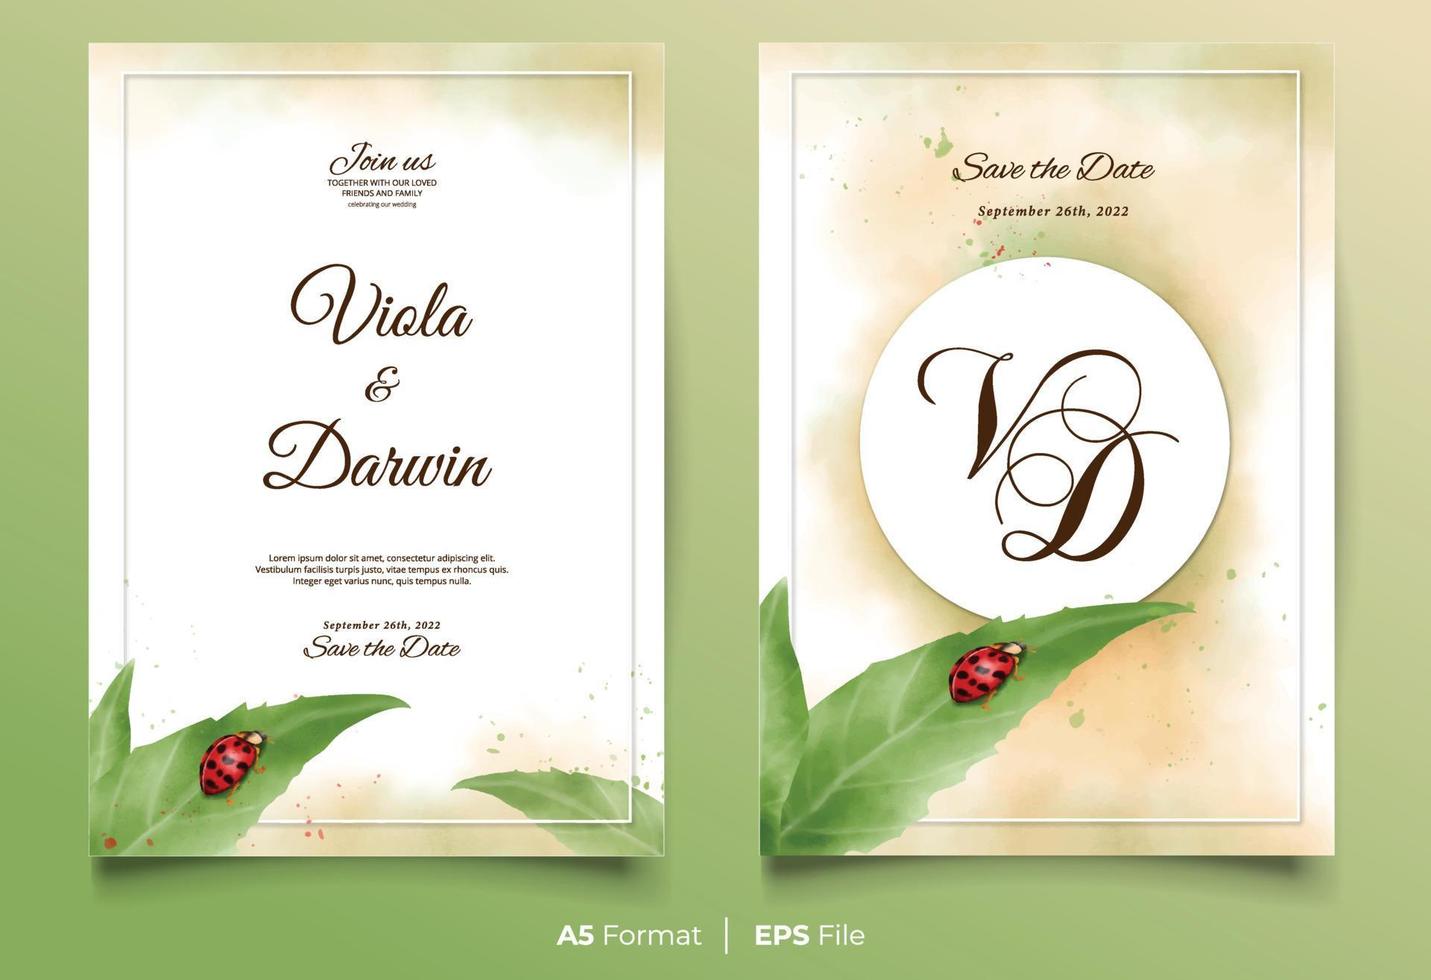 Watercolor wedding invitation with green leaf and ladybug vector